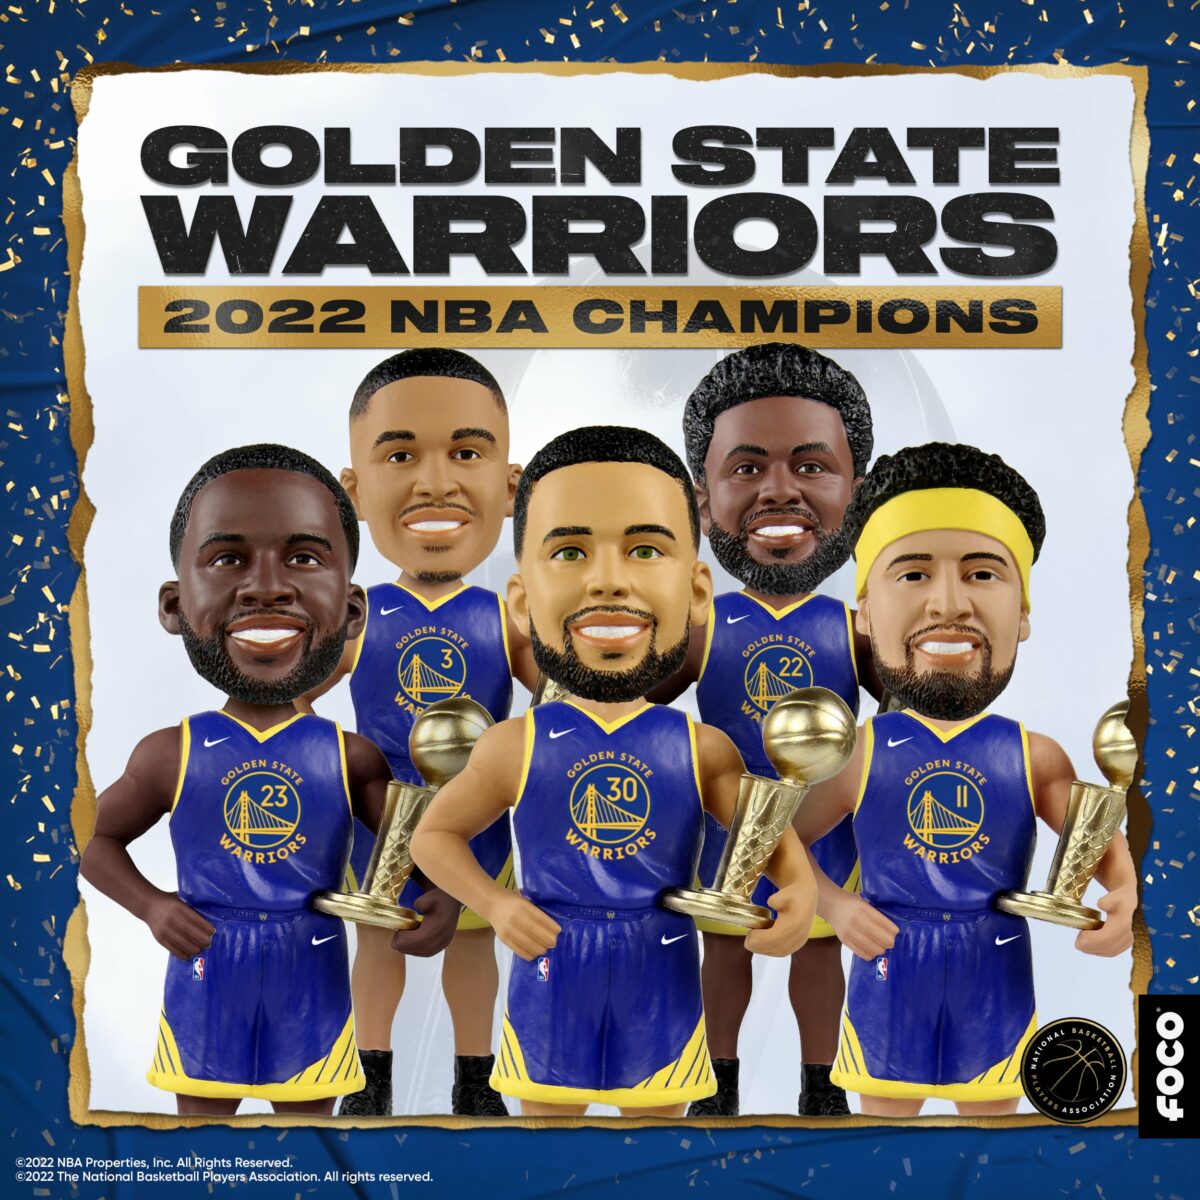 Golden State Warriors NBA Championship gear, celebrate your Warriors with this select gear from FOCO